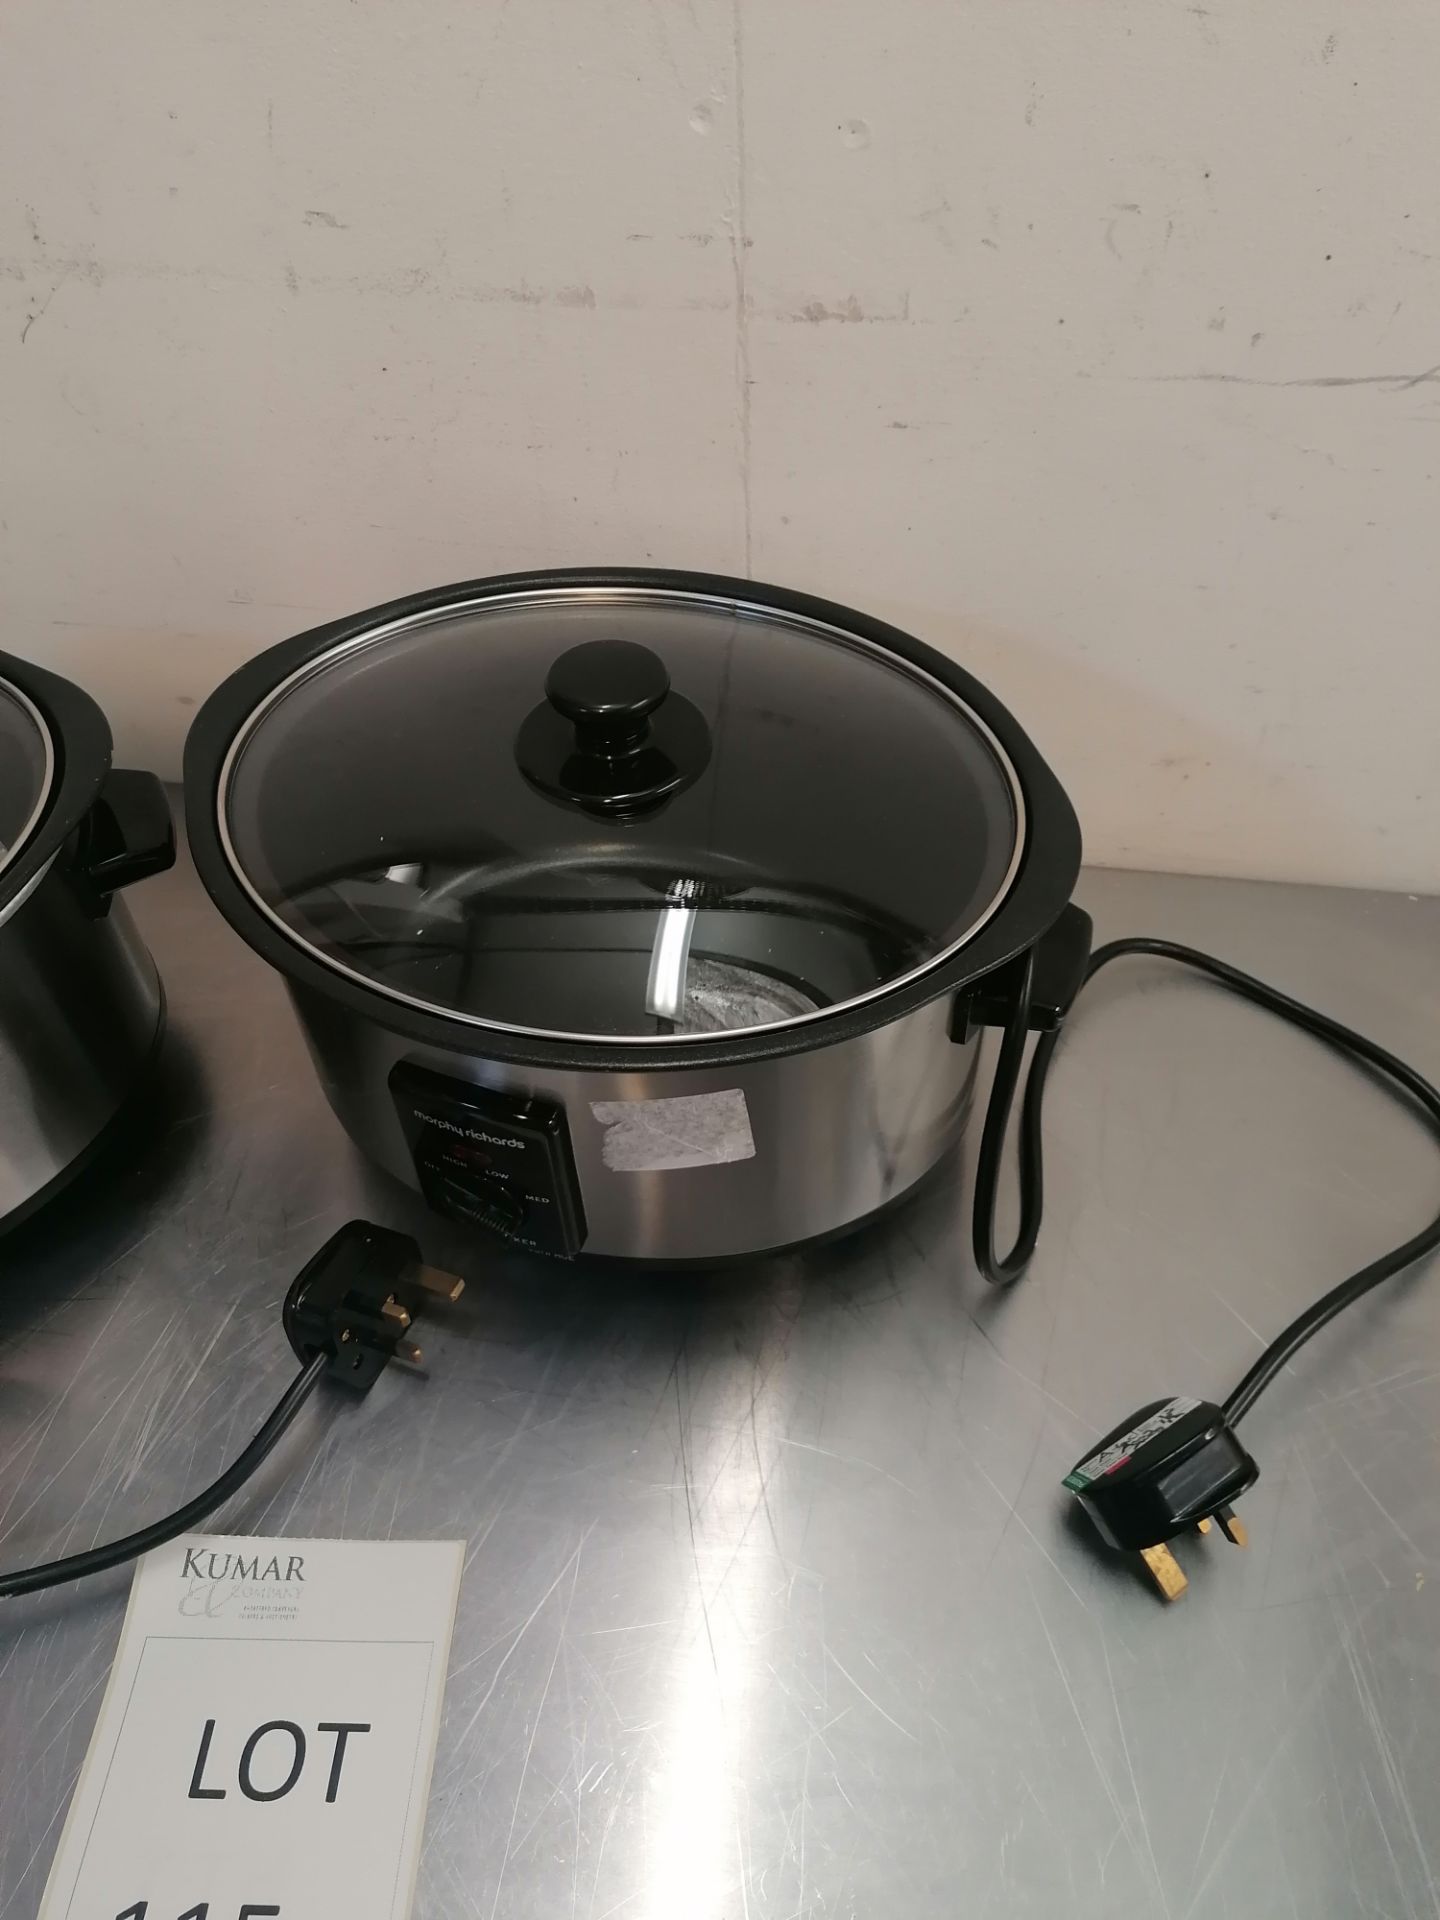 2 x Morphy richards 48701 slow cooker - Image 3 of 4